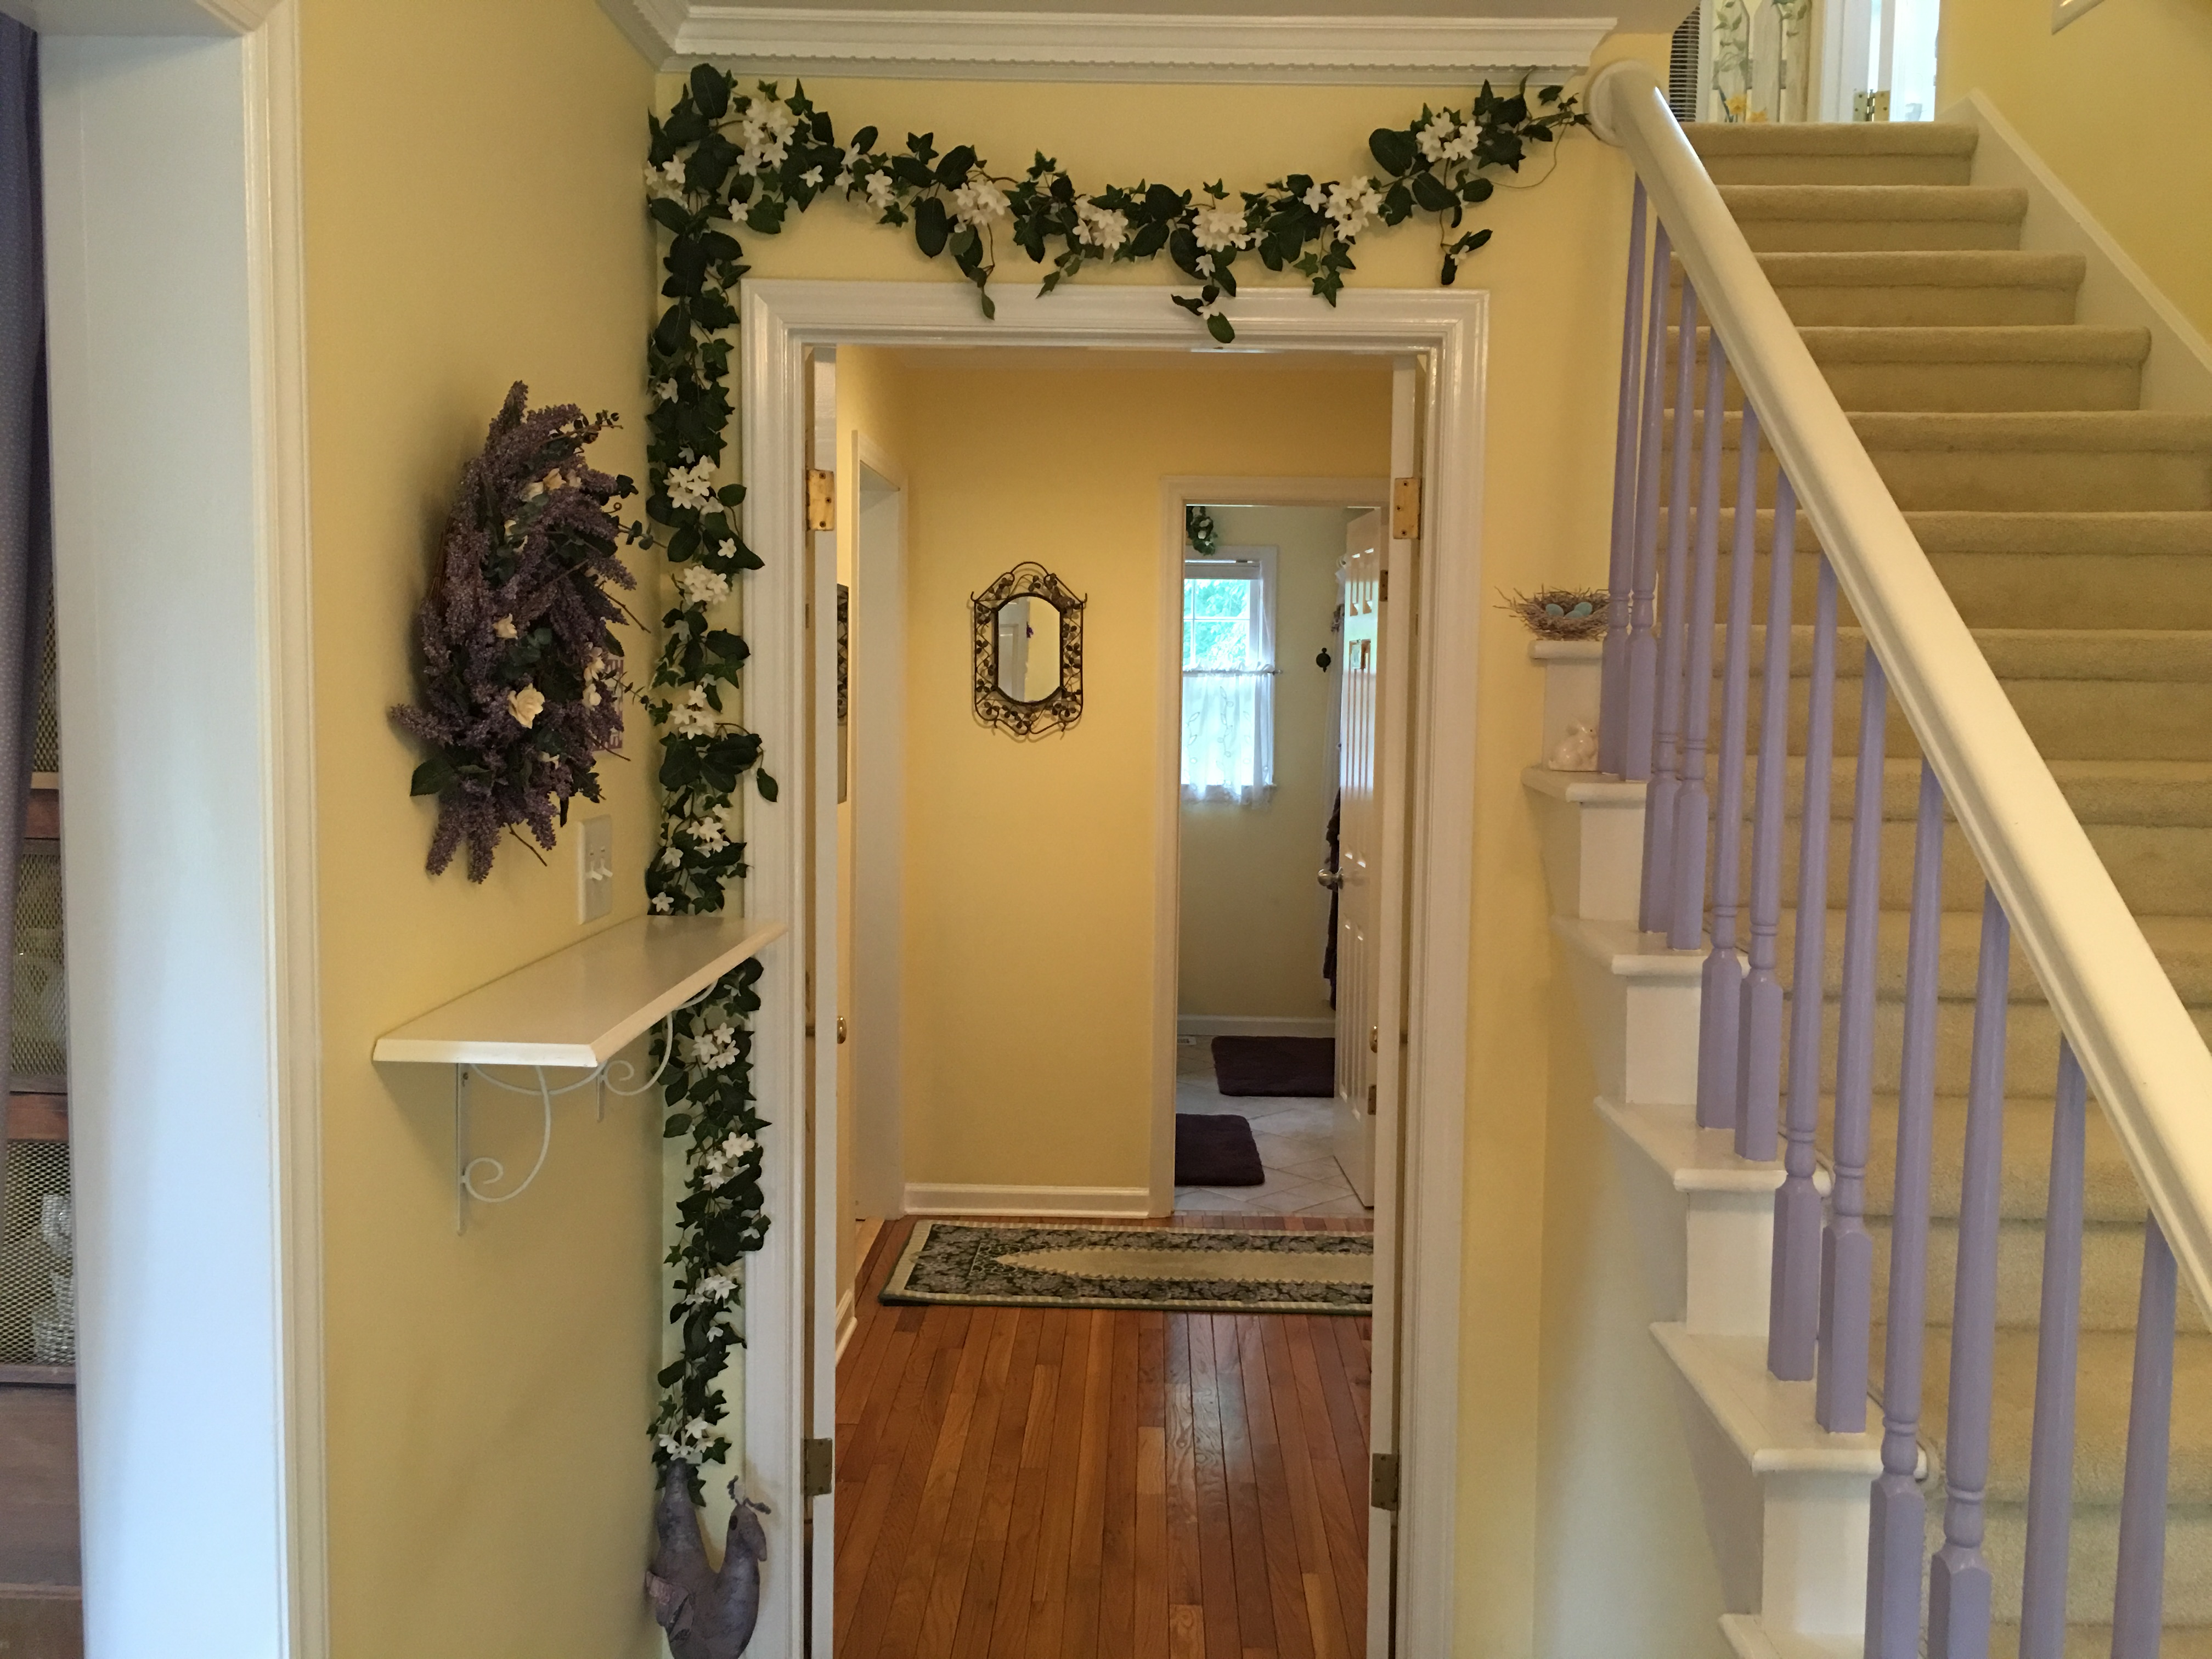 Step through the front door into the foyer of GardenSpirit with soft yellow walls and a floral motif.